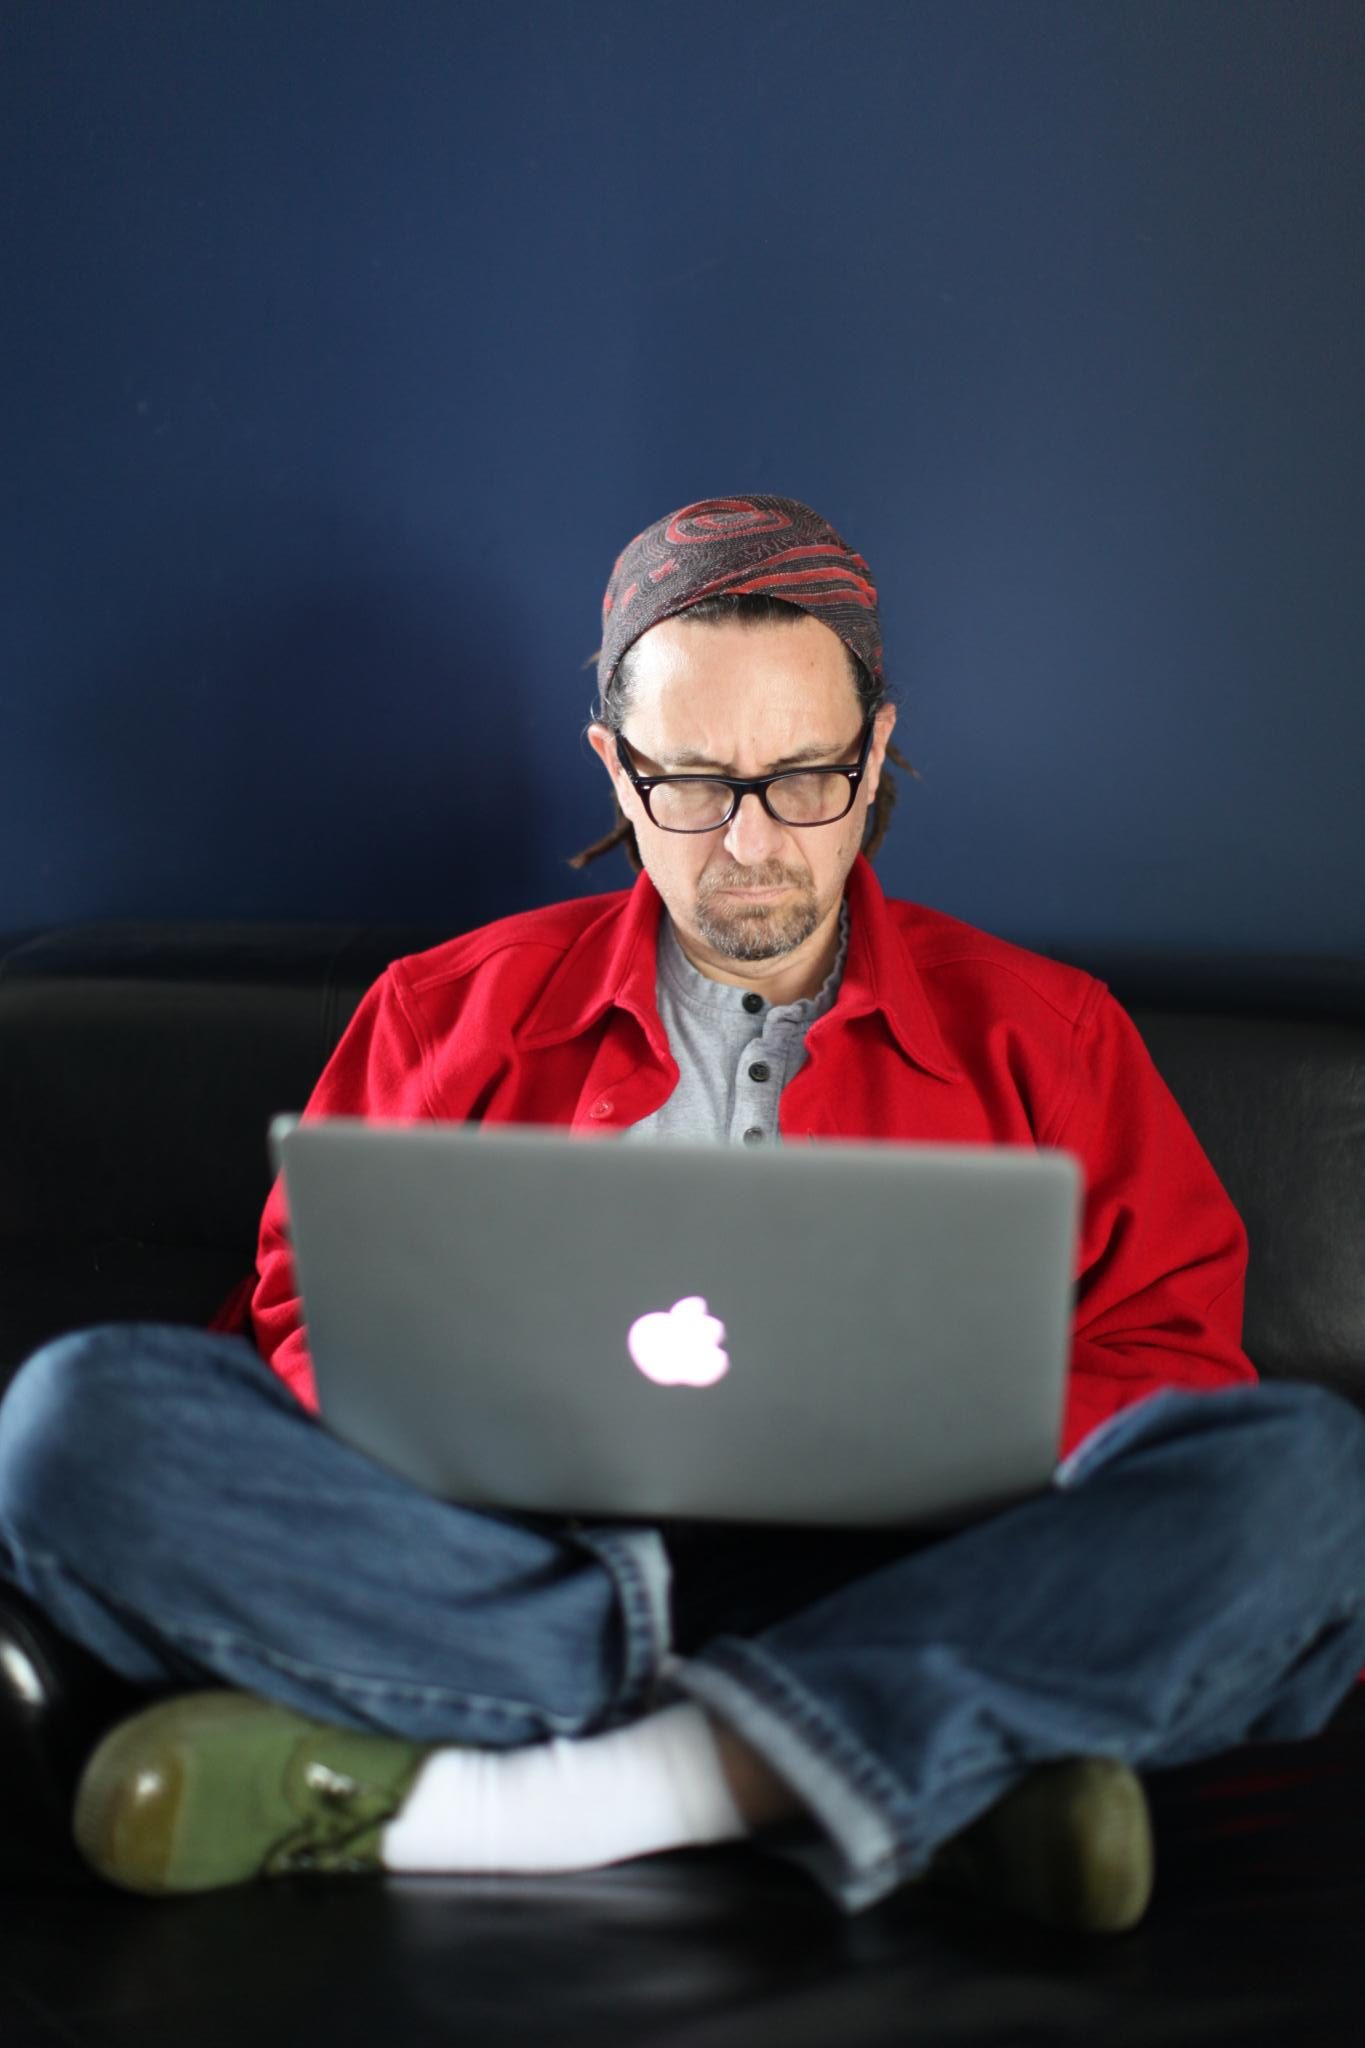 Man sitting on a couch working on a Macbook